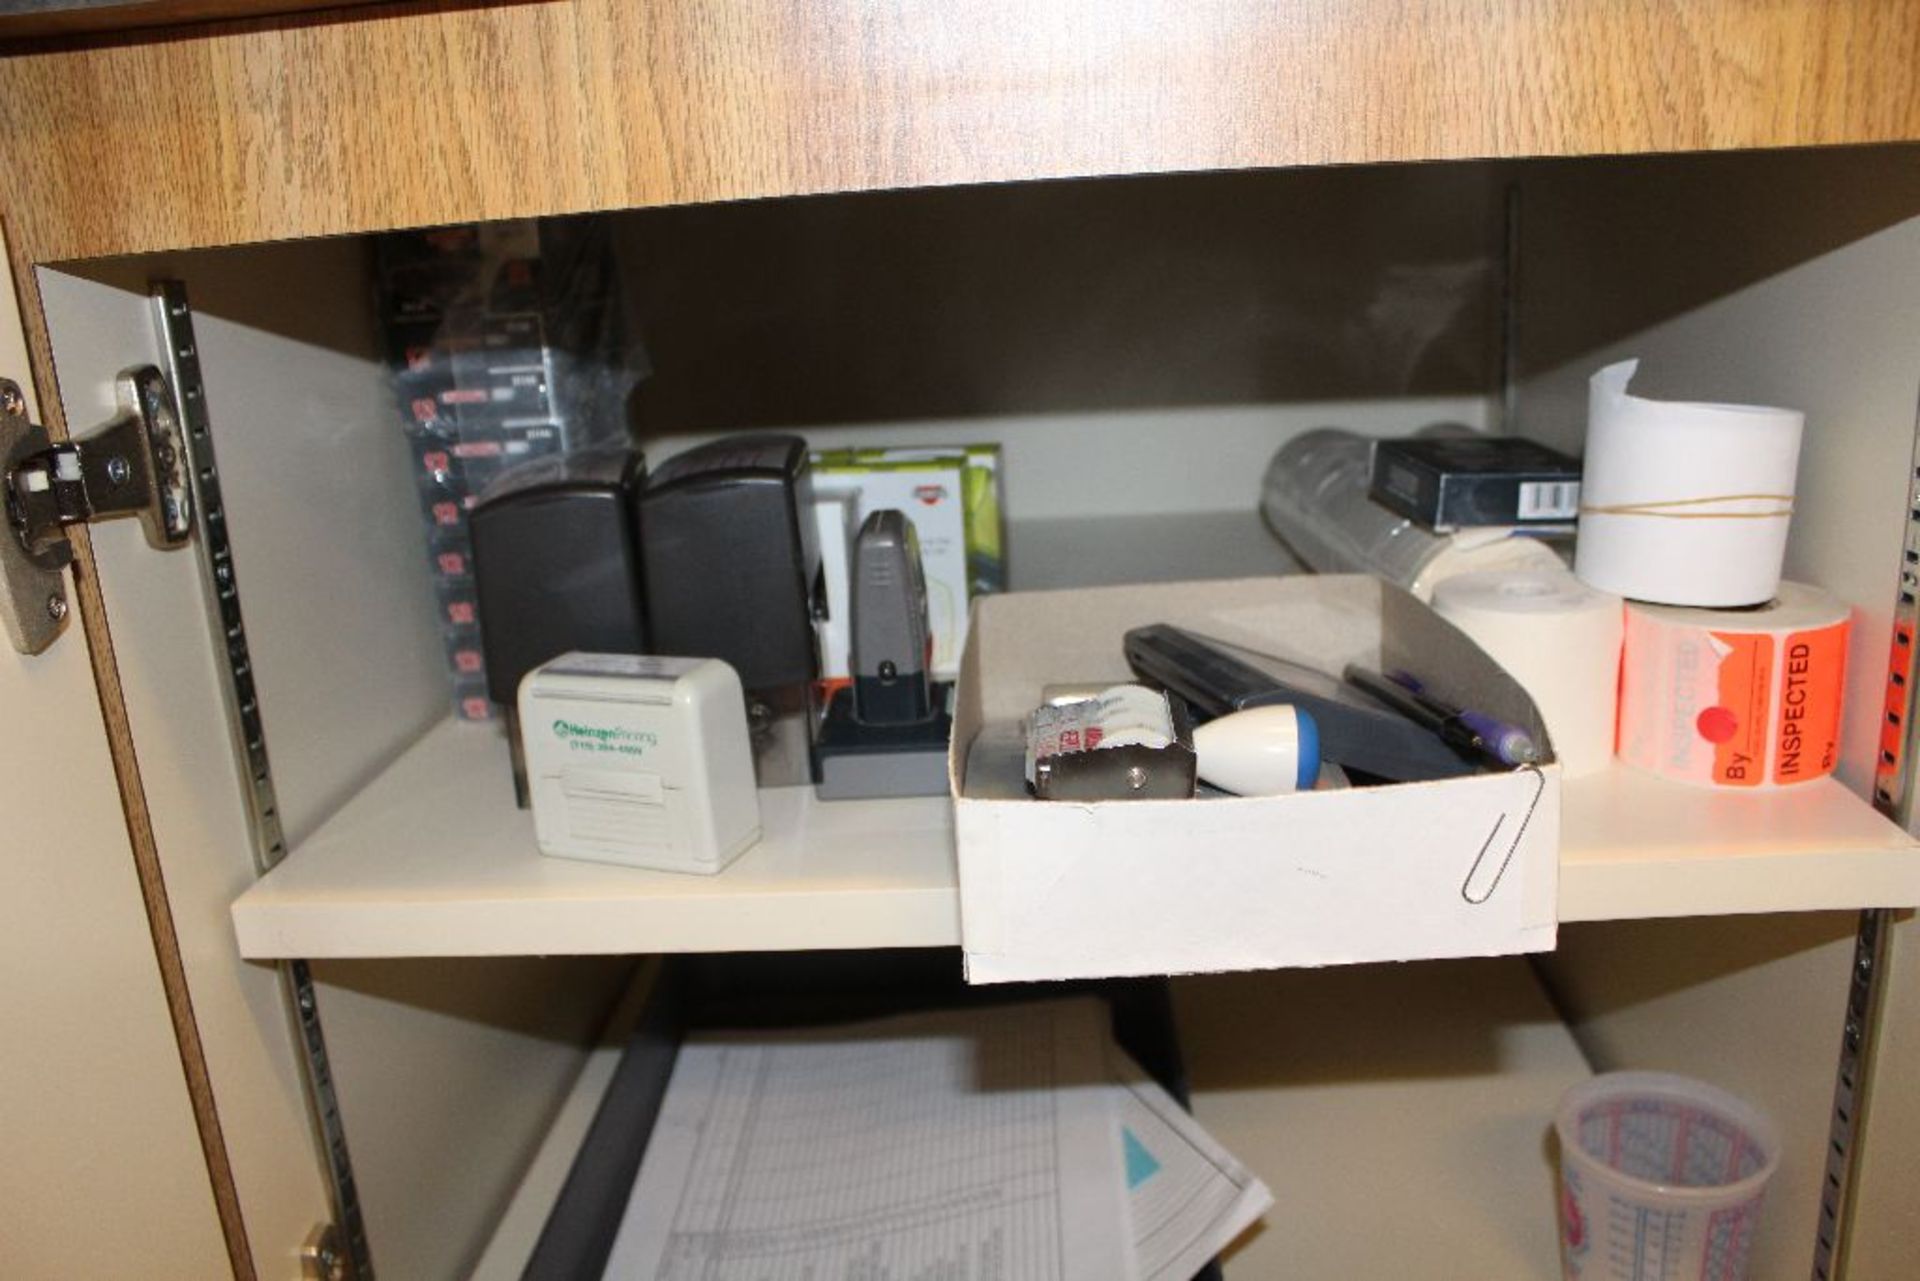 Contents of drawers below: various office supplies: (tape, staples, etc.) - Image 5 of 5